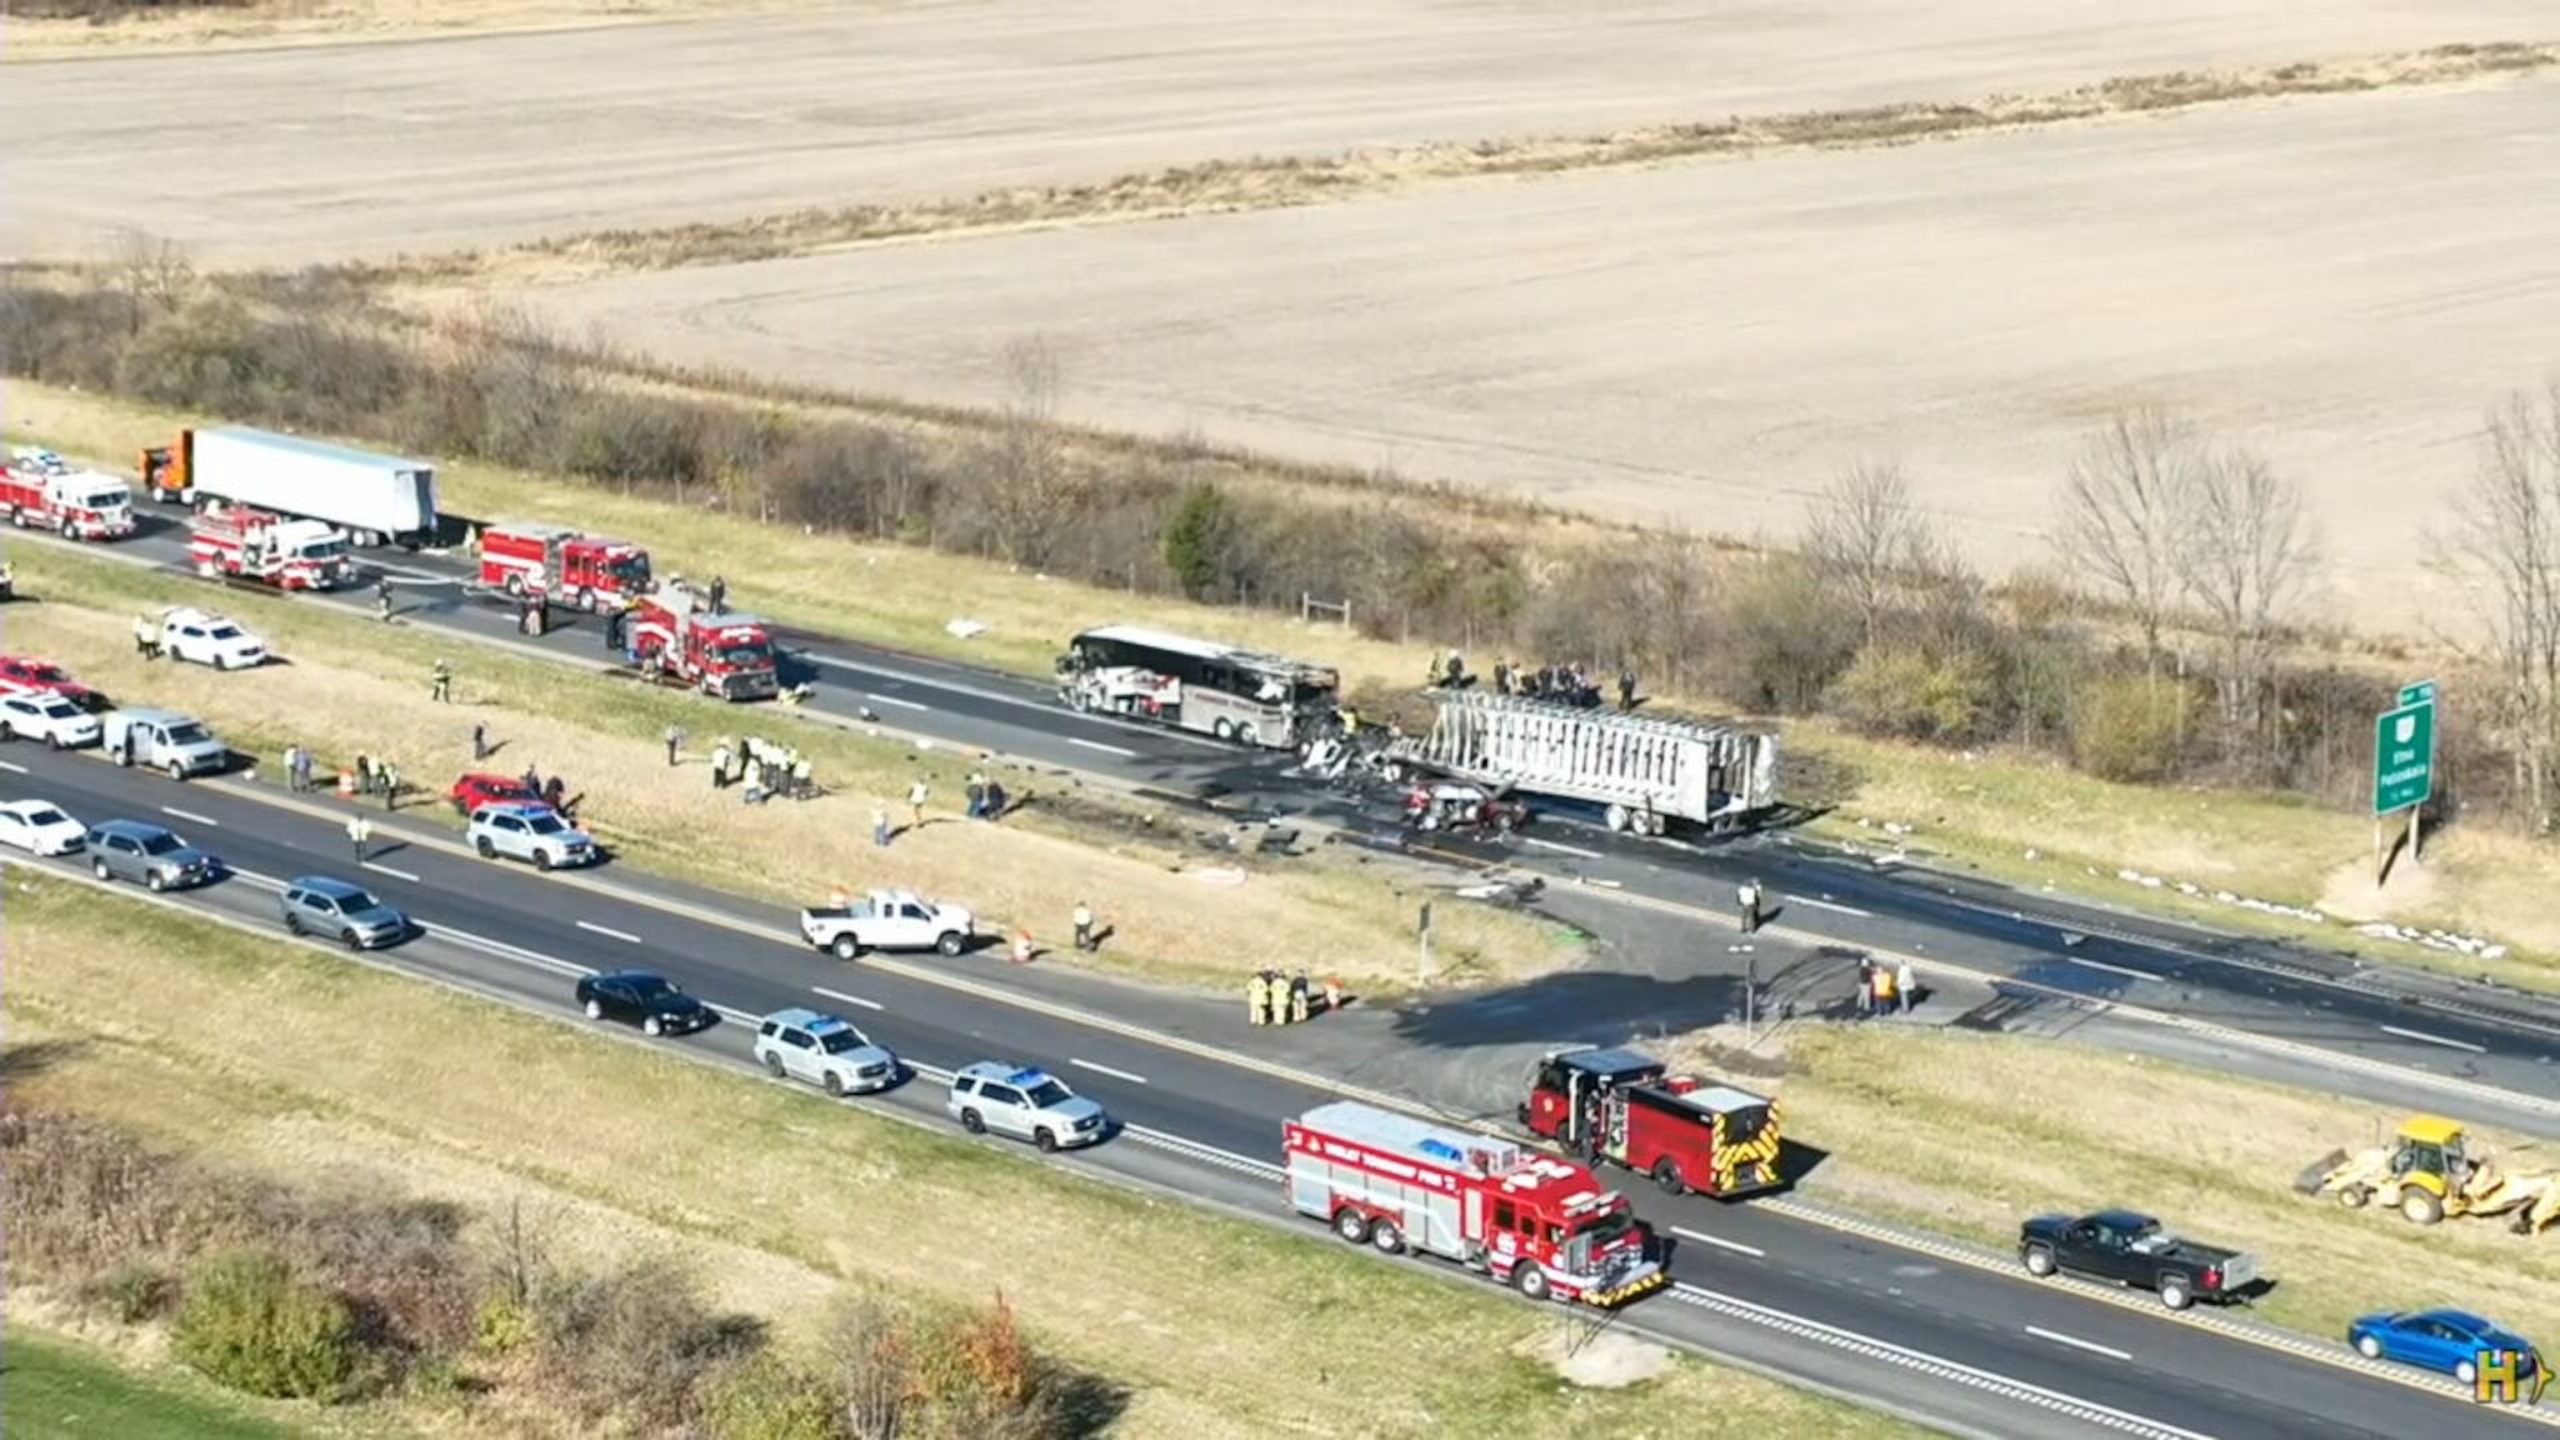 Official confirms 6 fatalities in multi-vehicle collision on Ohio highway